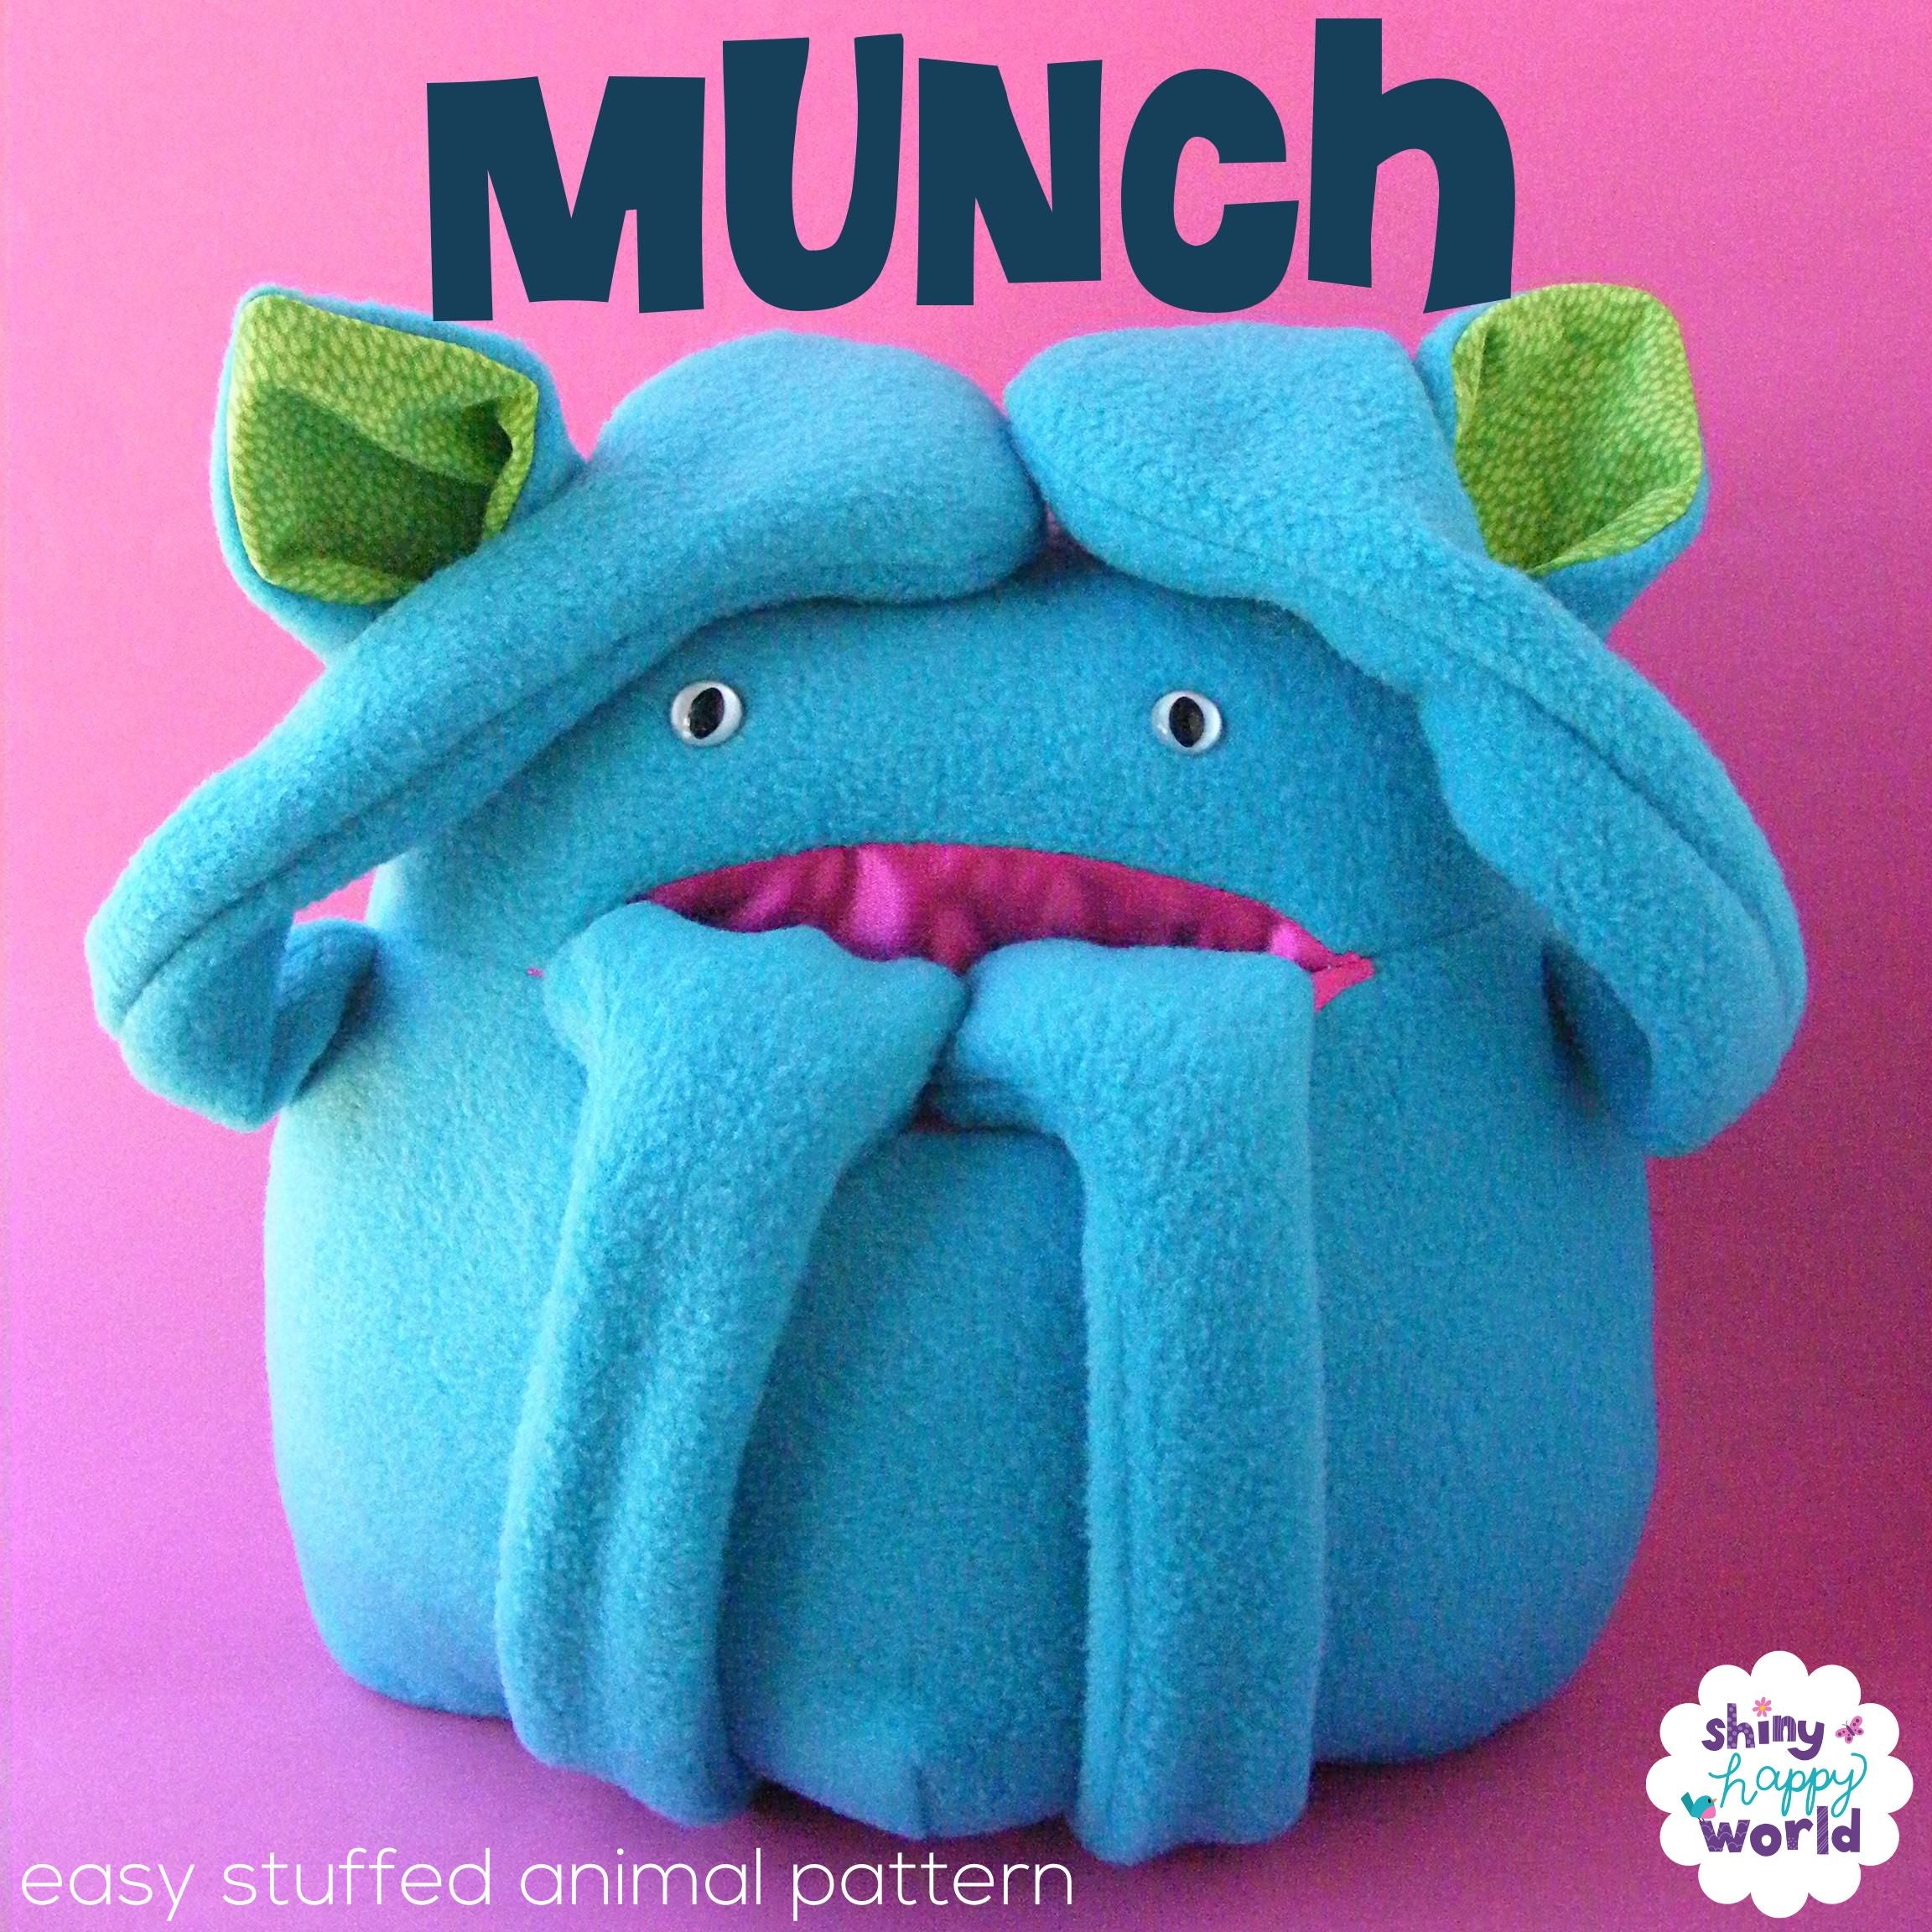 Munch - a softie pattern with a fun pocket mouth